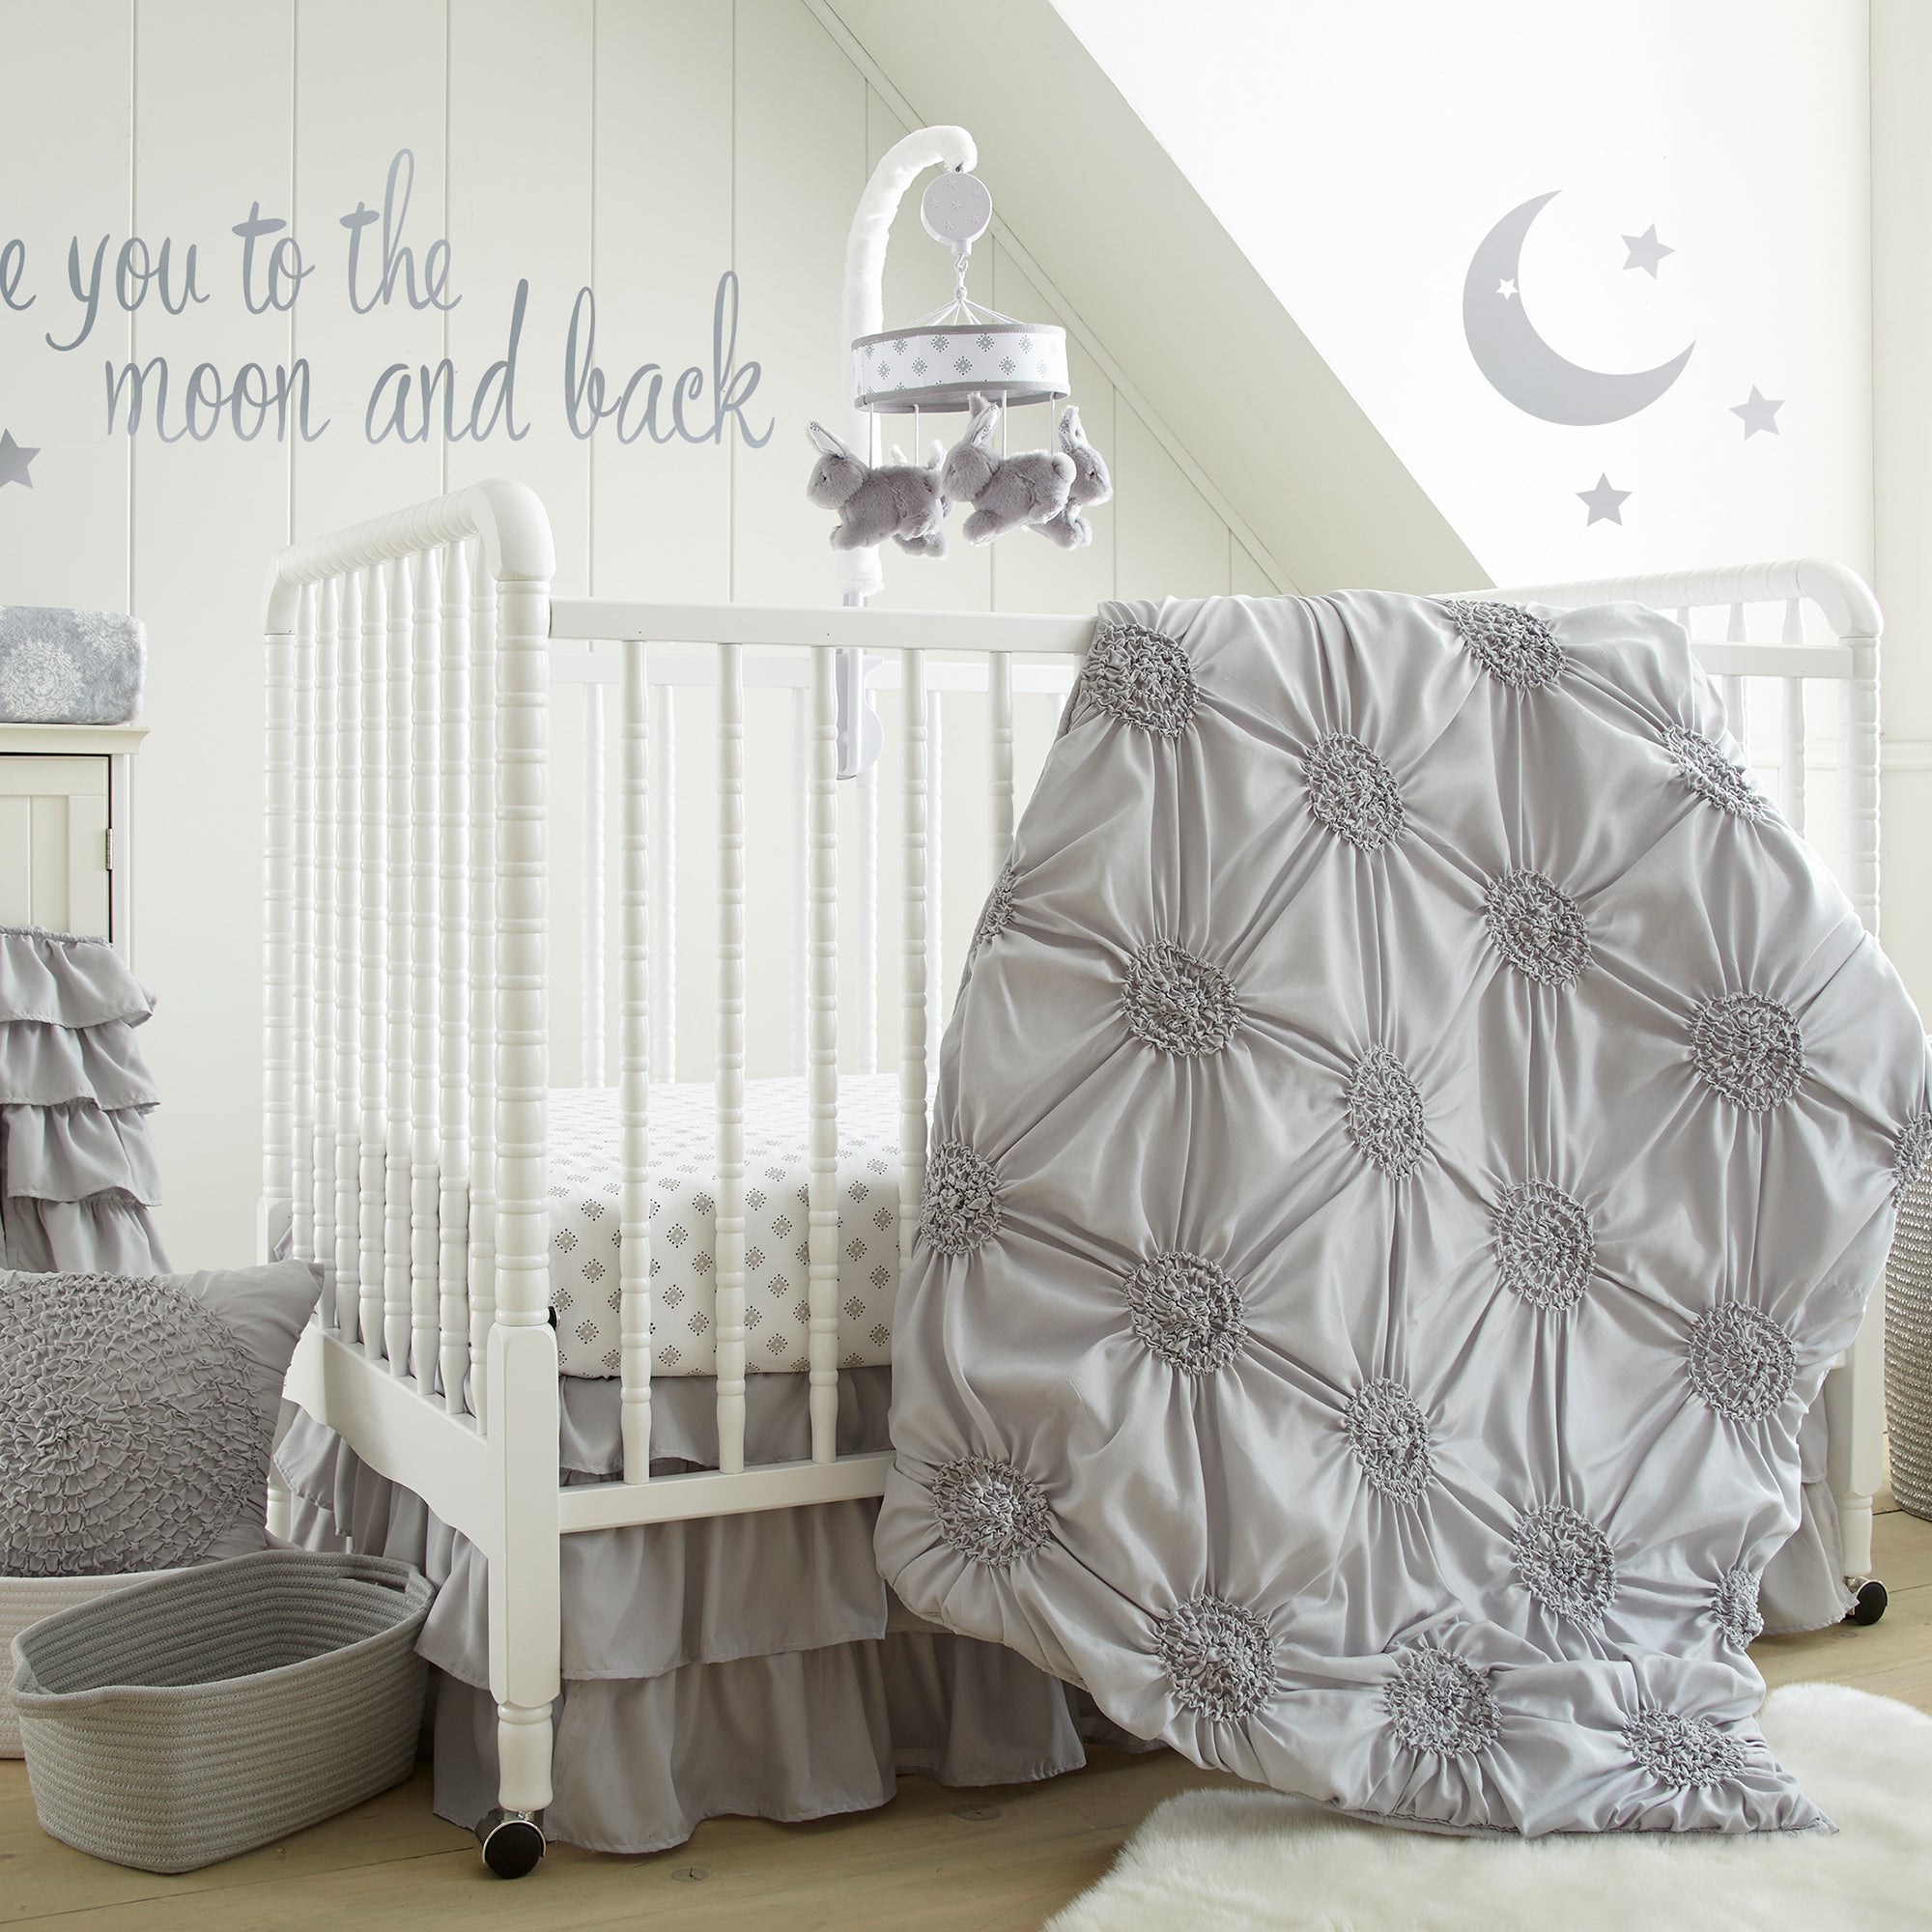 Willow Medallion Crib Fitted Sheet